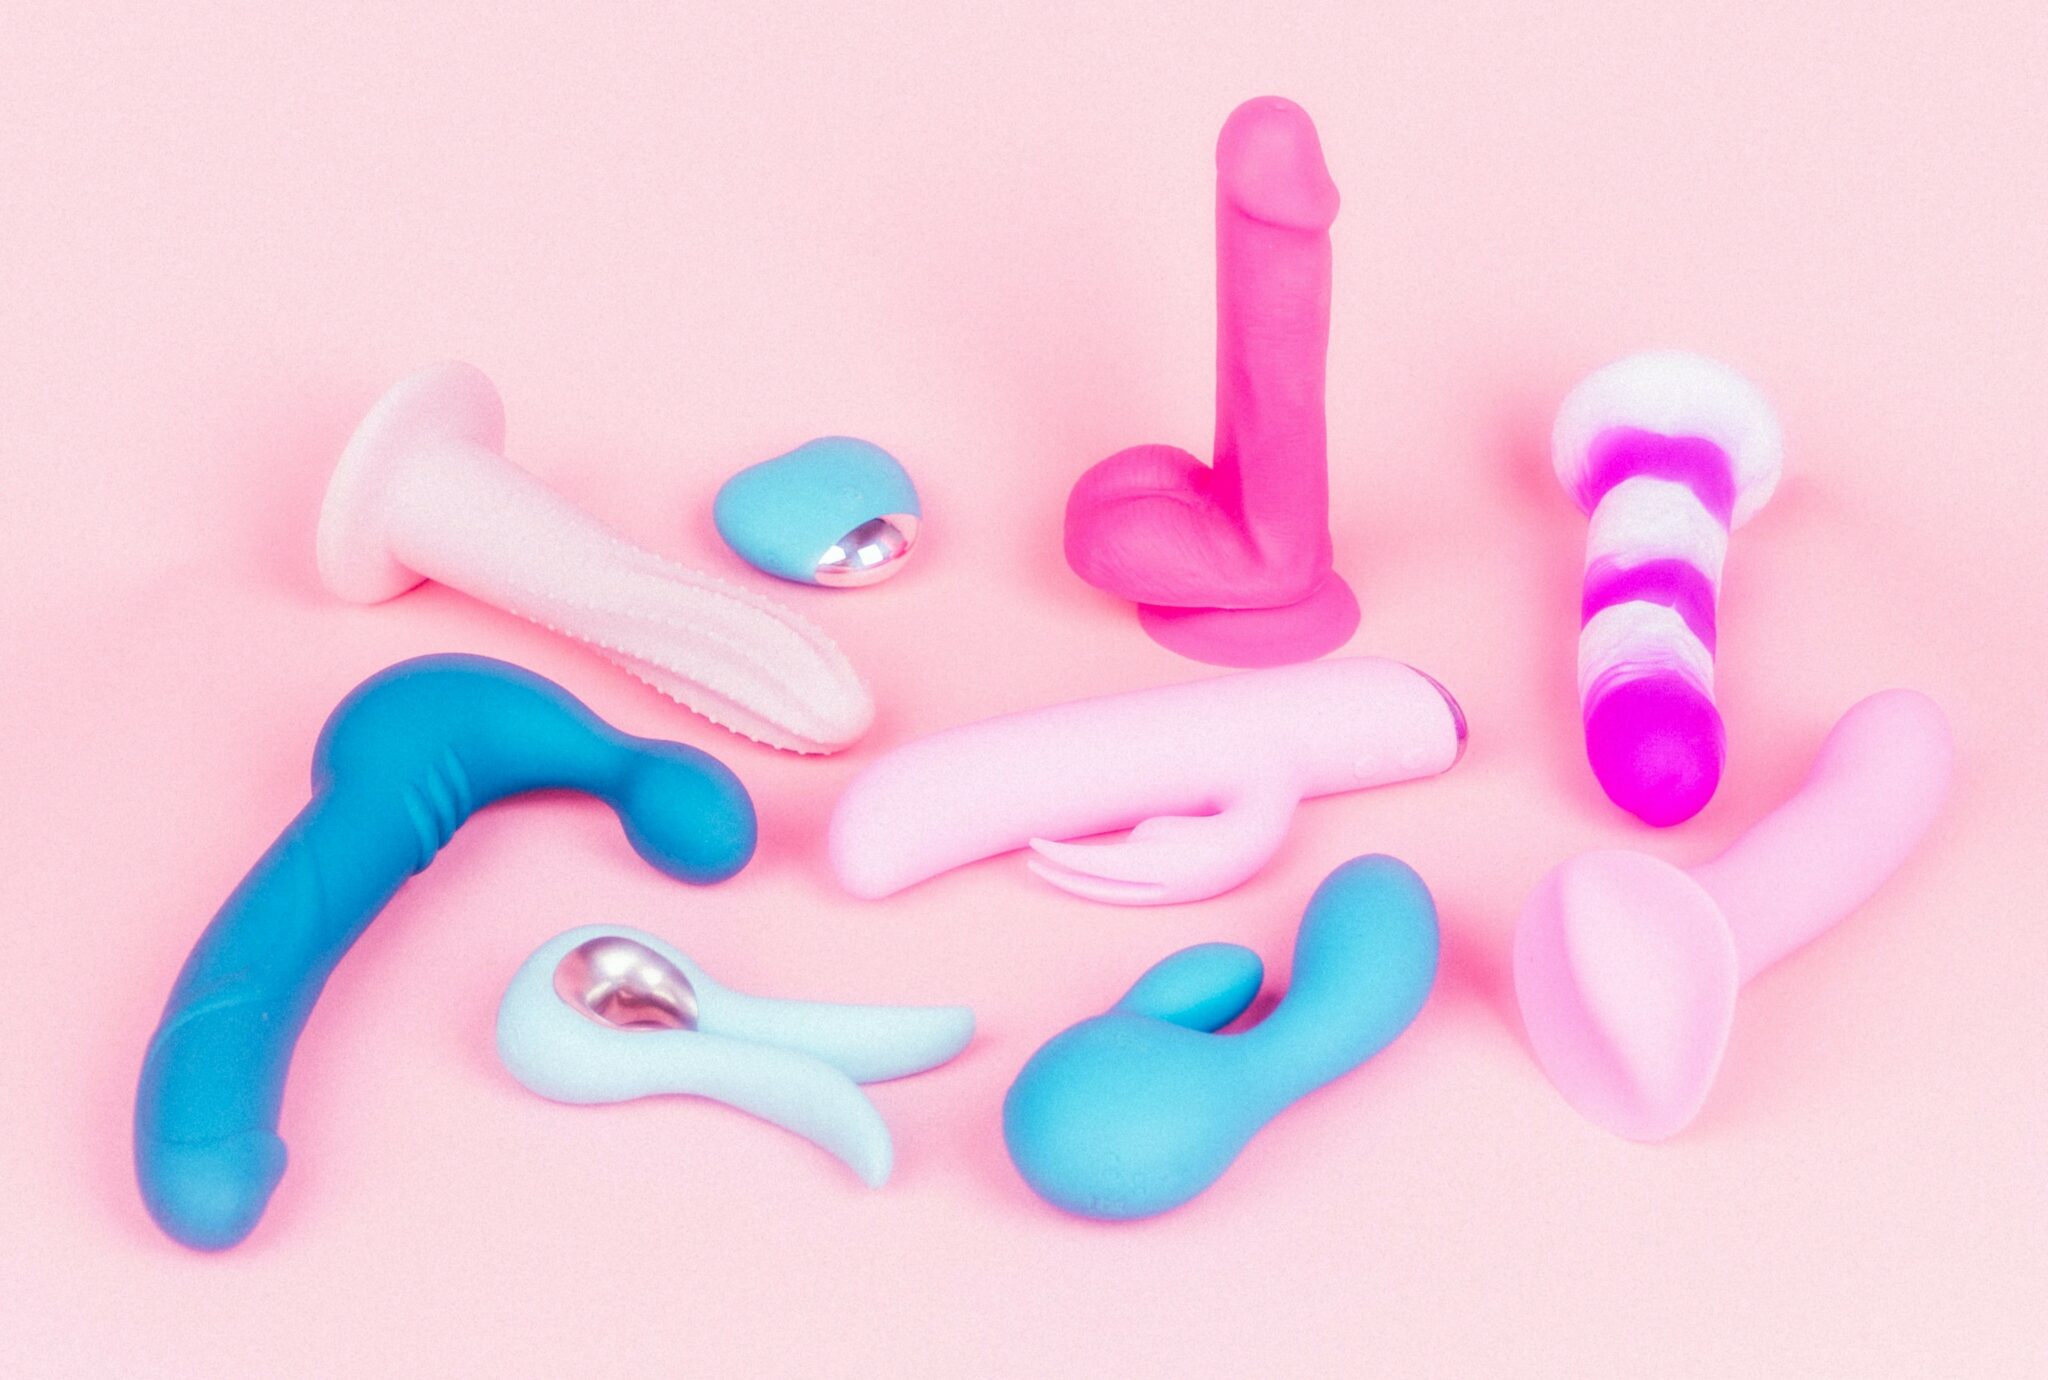 A variety of dildos and vibrators in blue, pink, and purple on a pink background.